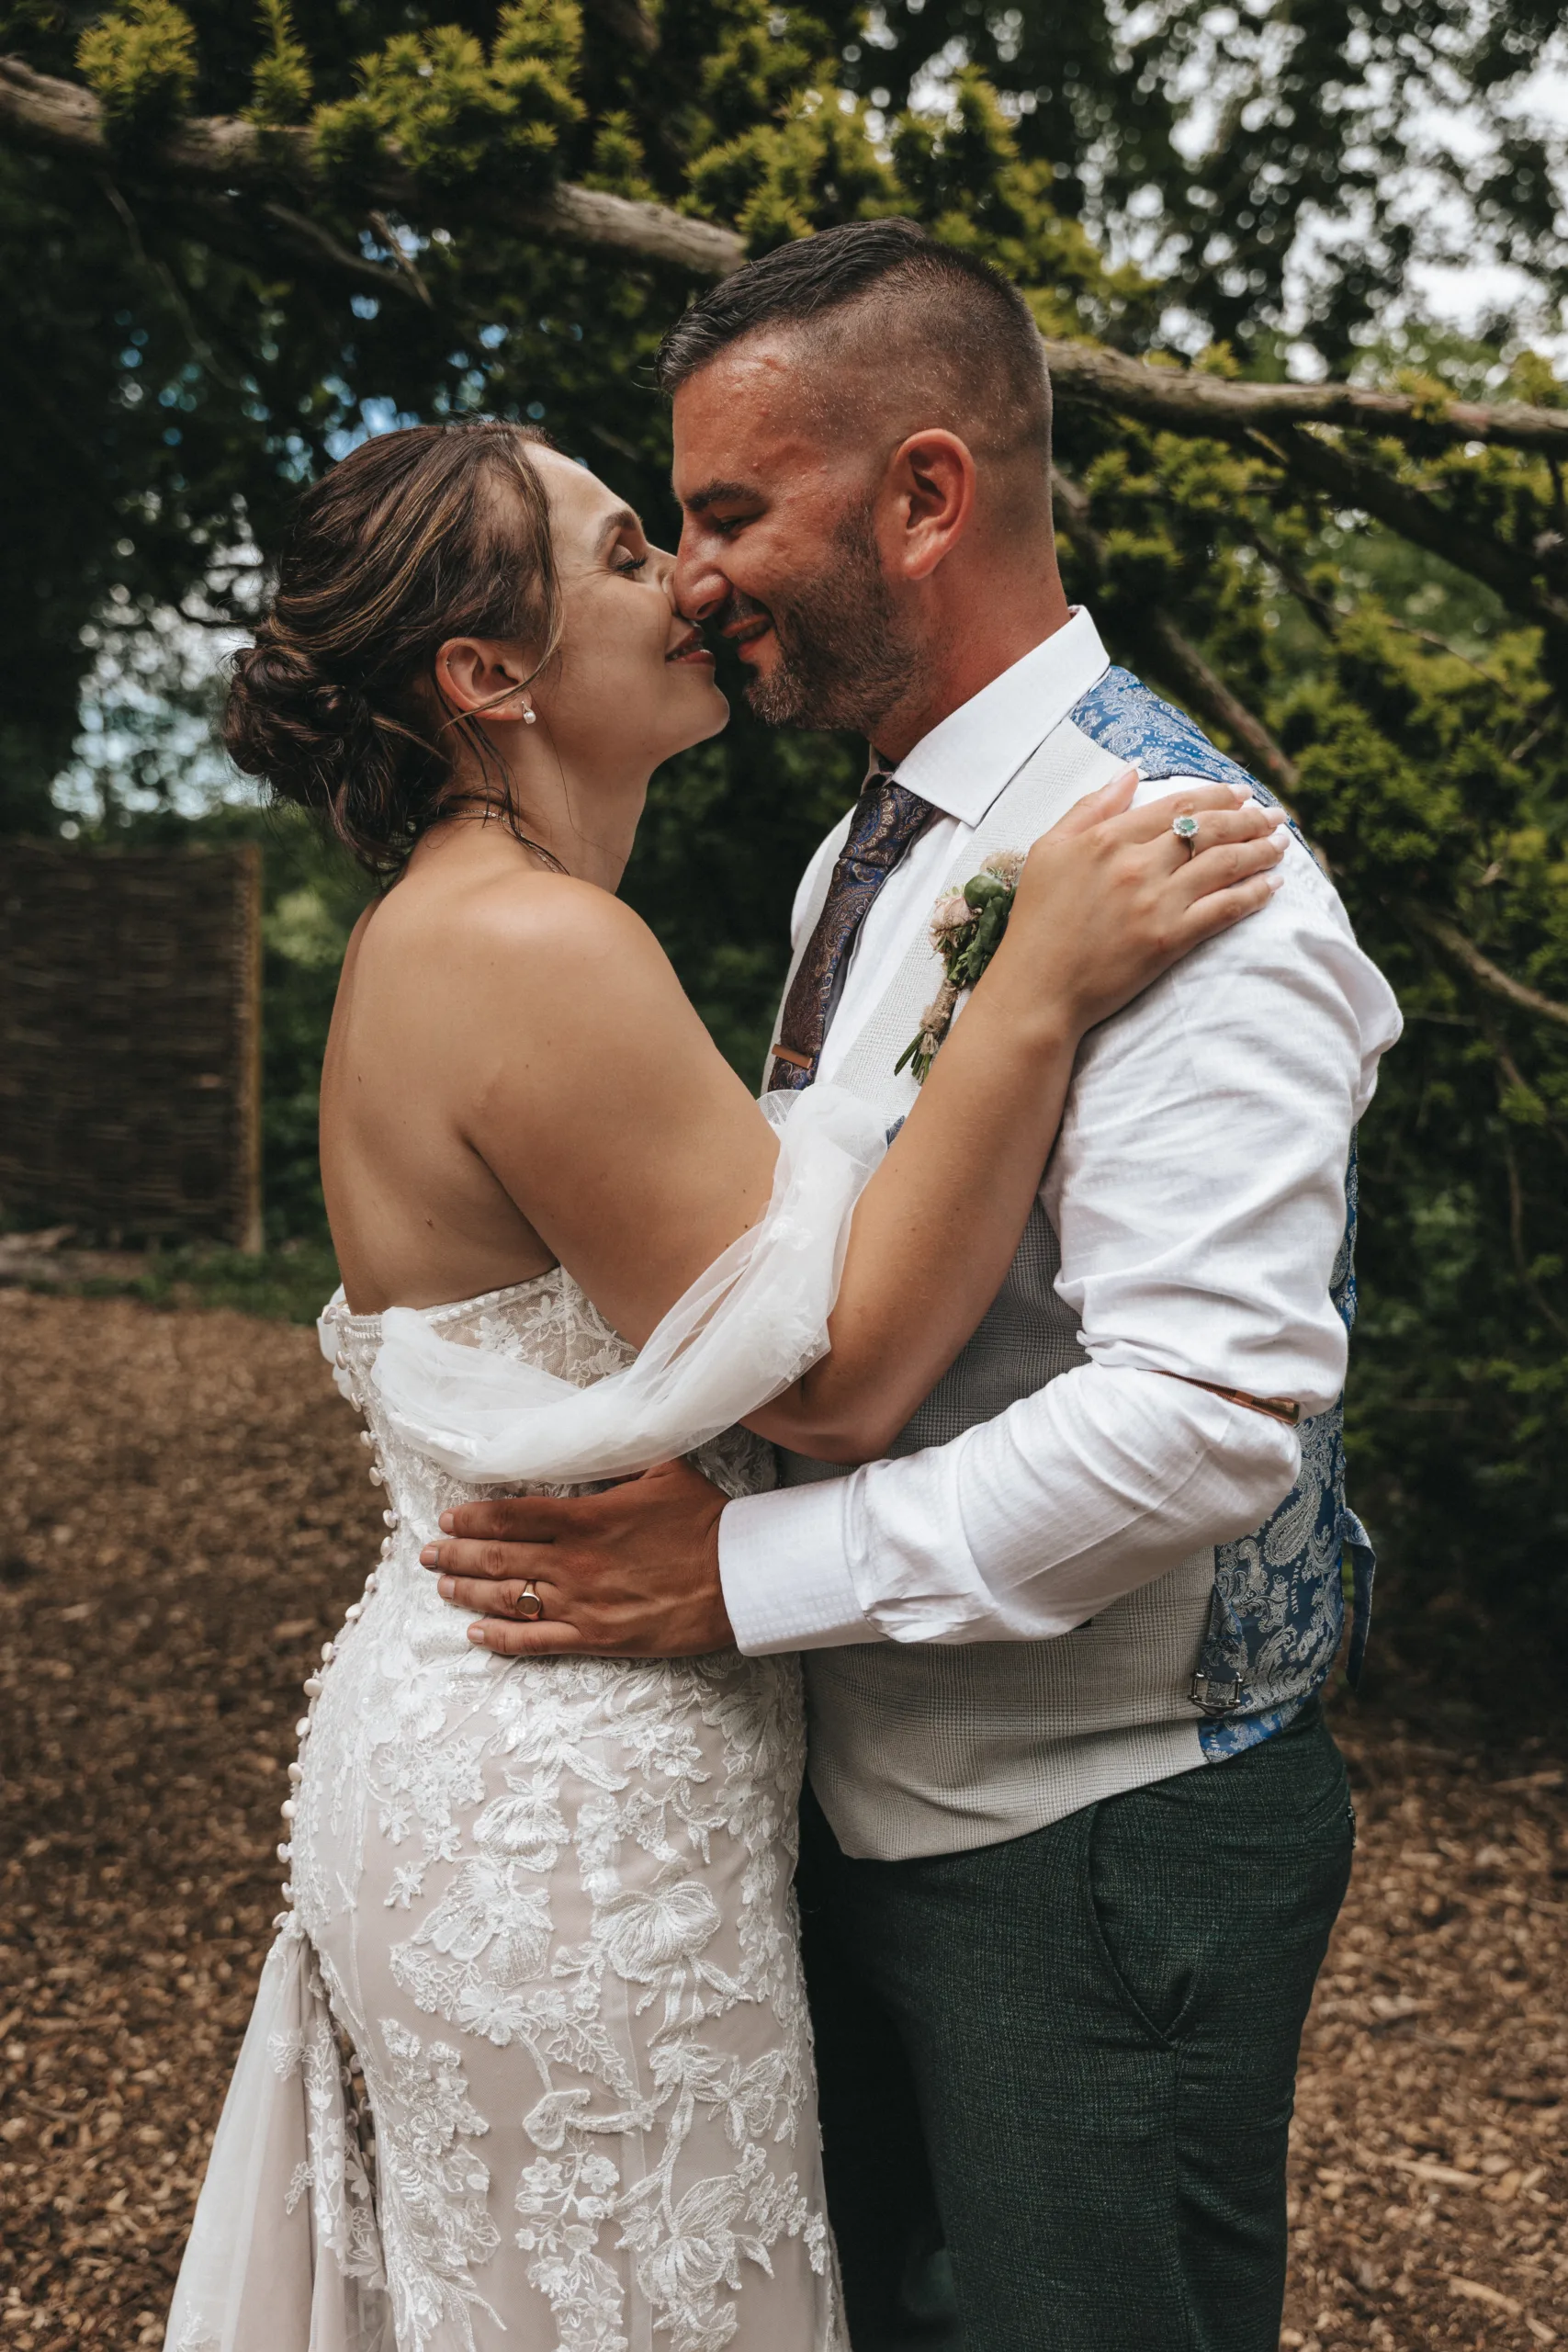 A bride and groom kissing in the woods captured in photography.